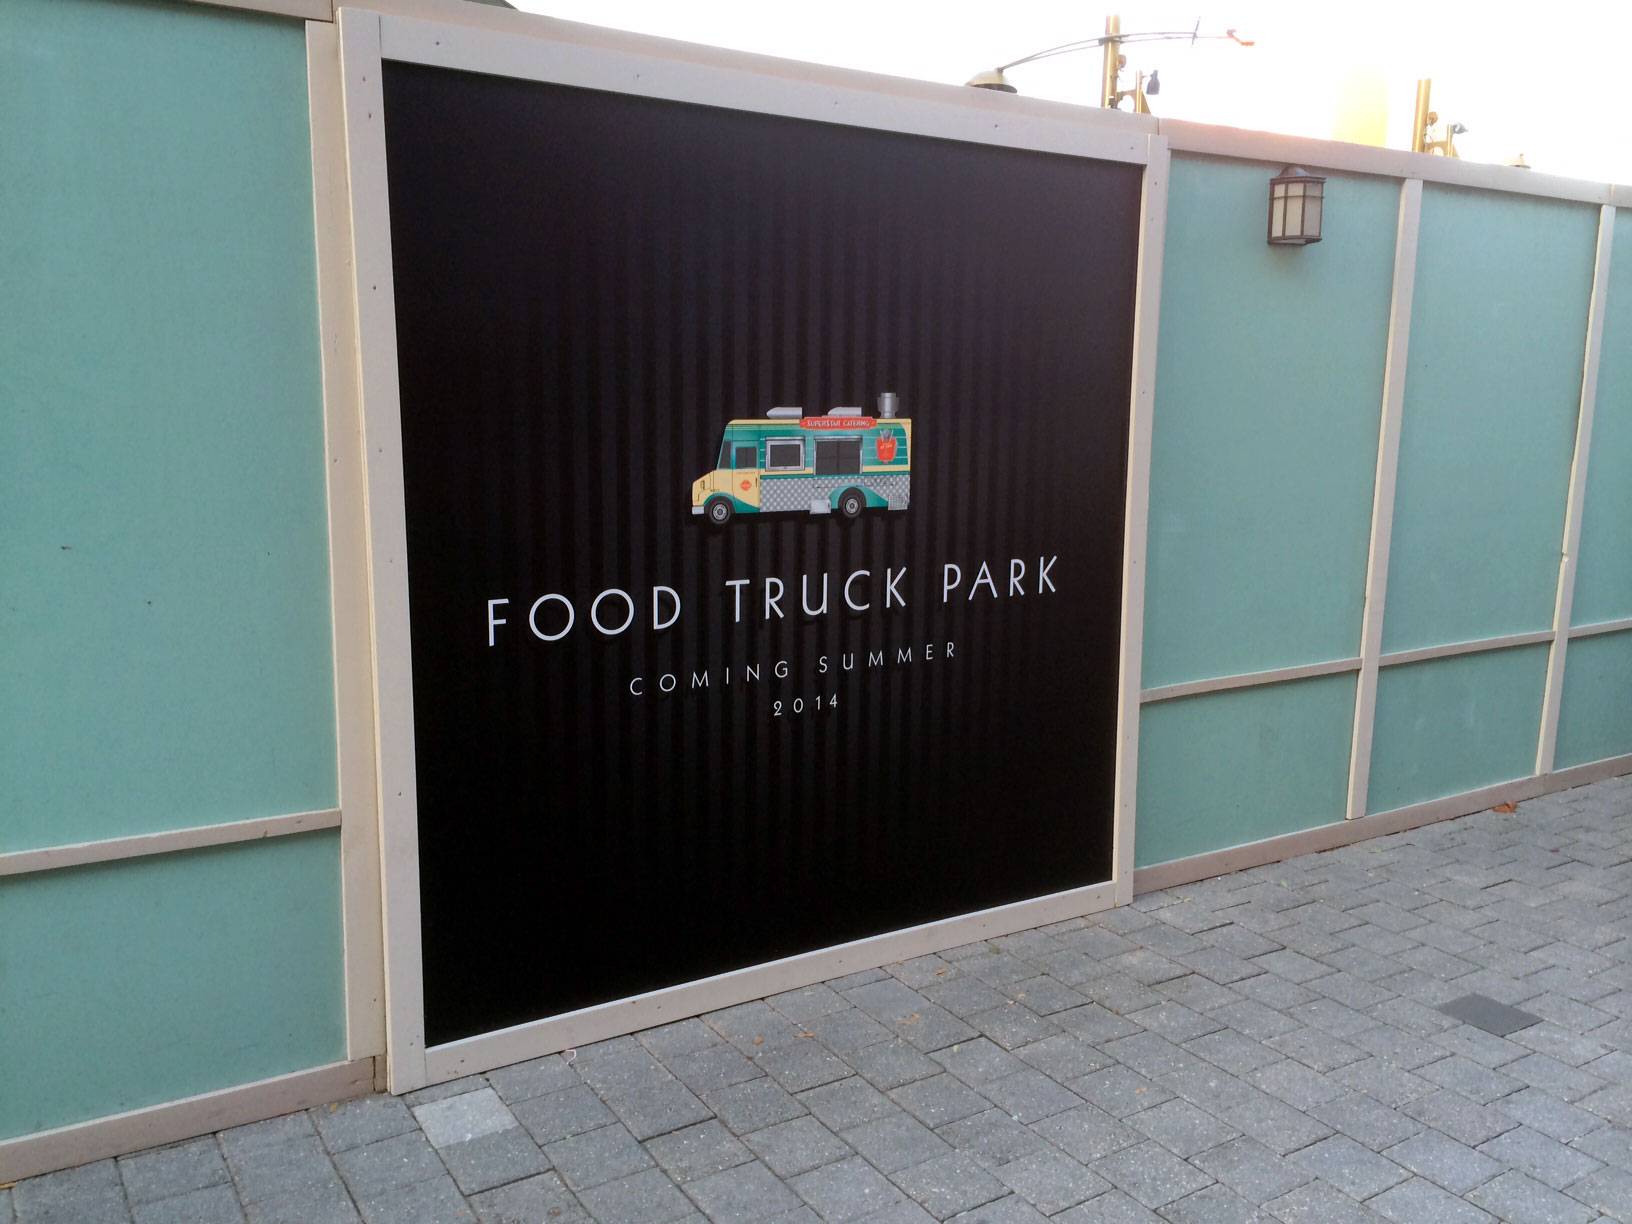 PHOTOS - Disney Springs Food Truck Park now under construction at the West Side